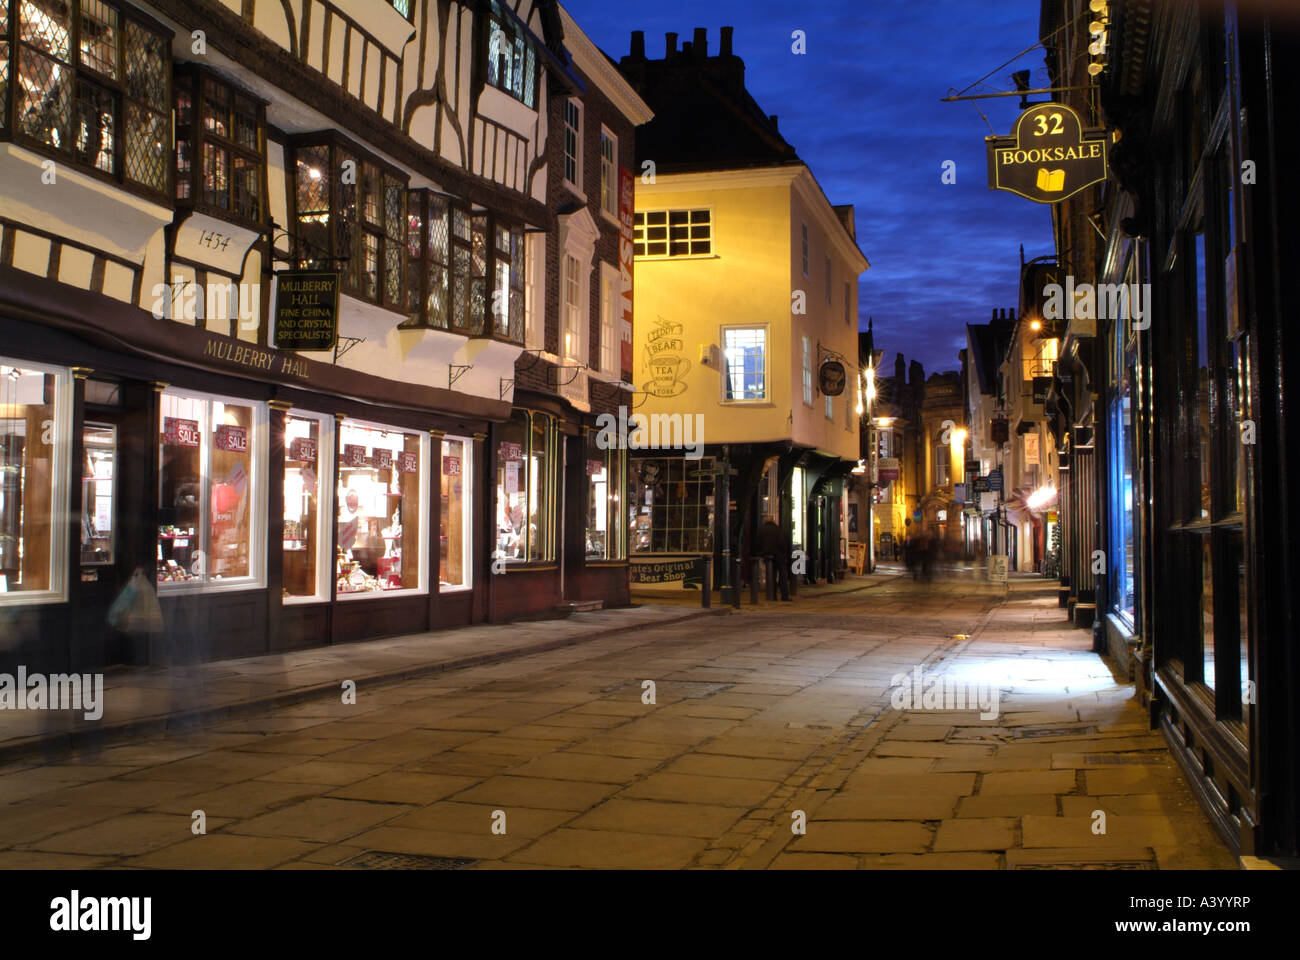 Looking south-west along the old paved street of Stonegate, York. Stock Photo